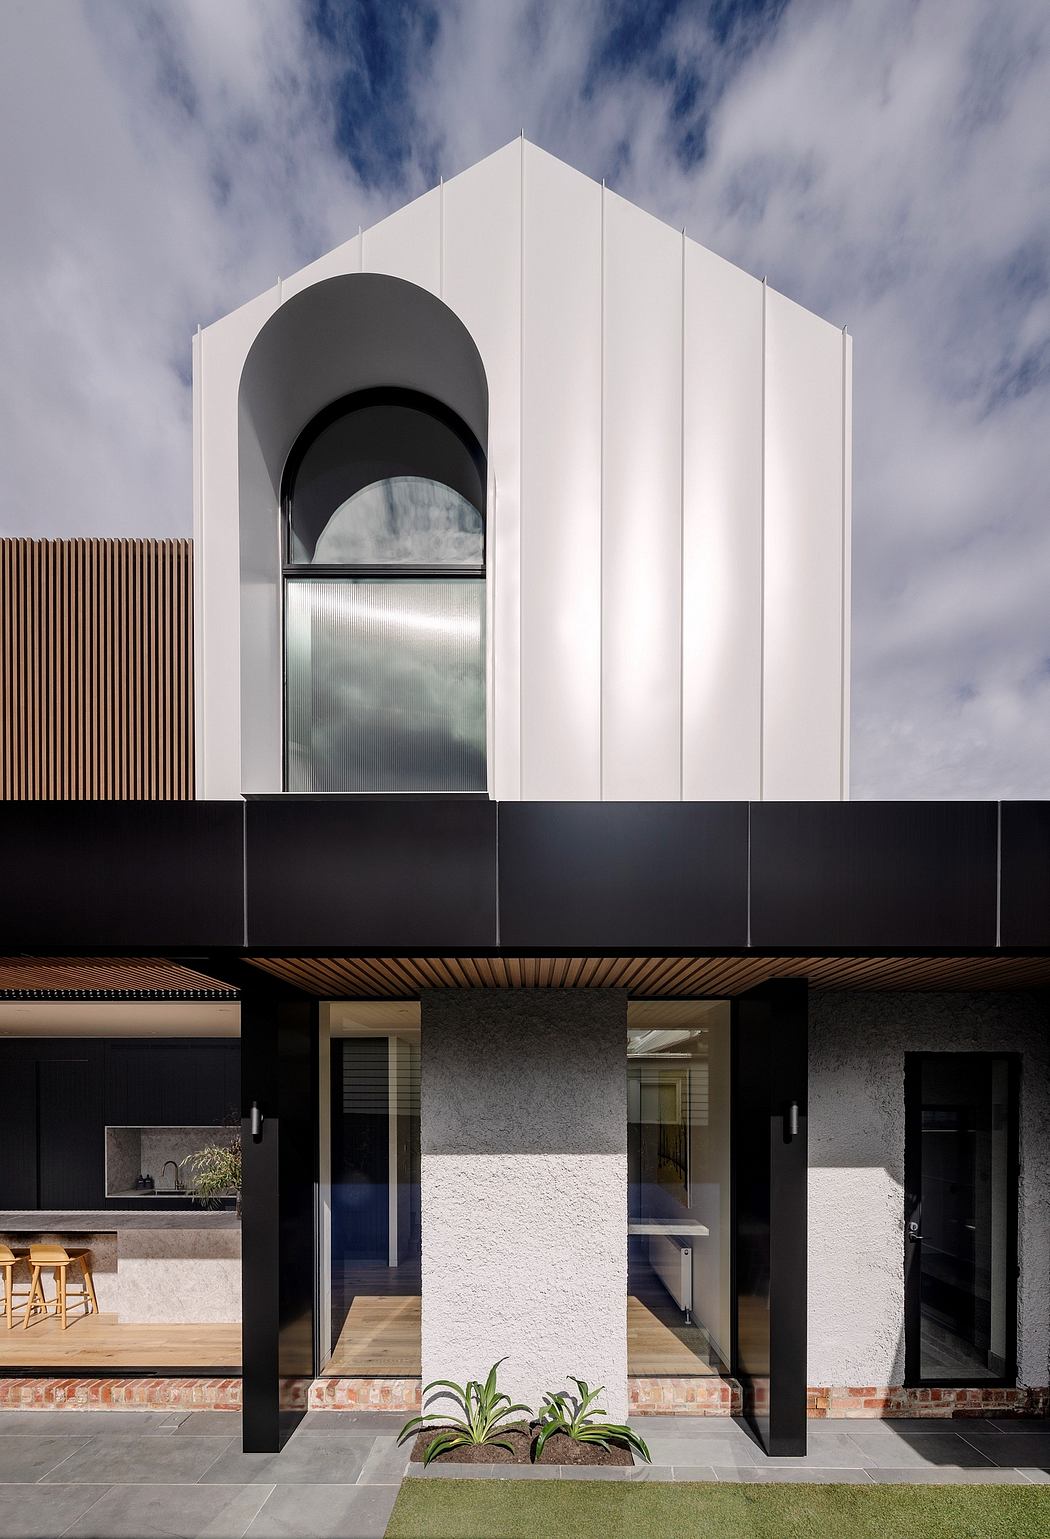 Modern architectural design with contrasting white and black facades, arched entryway, and wood accents.